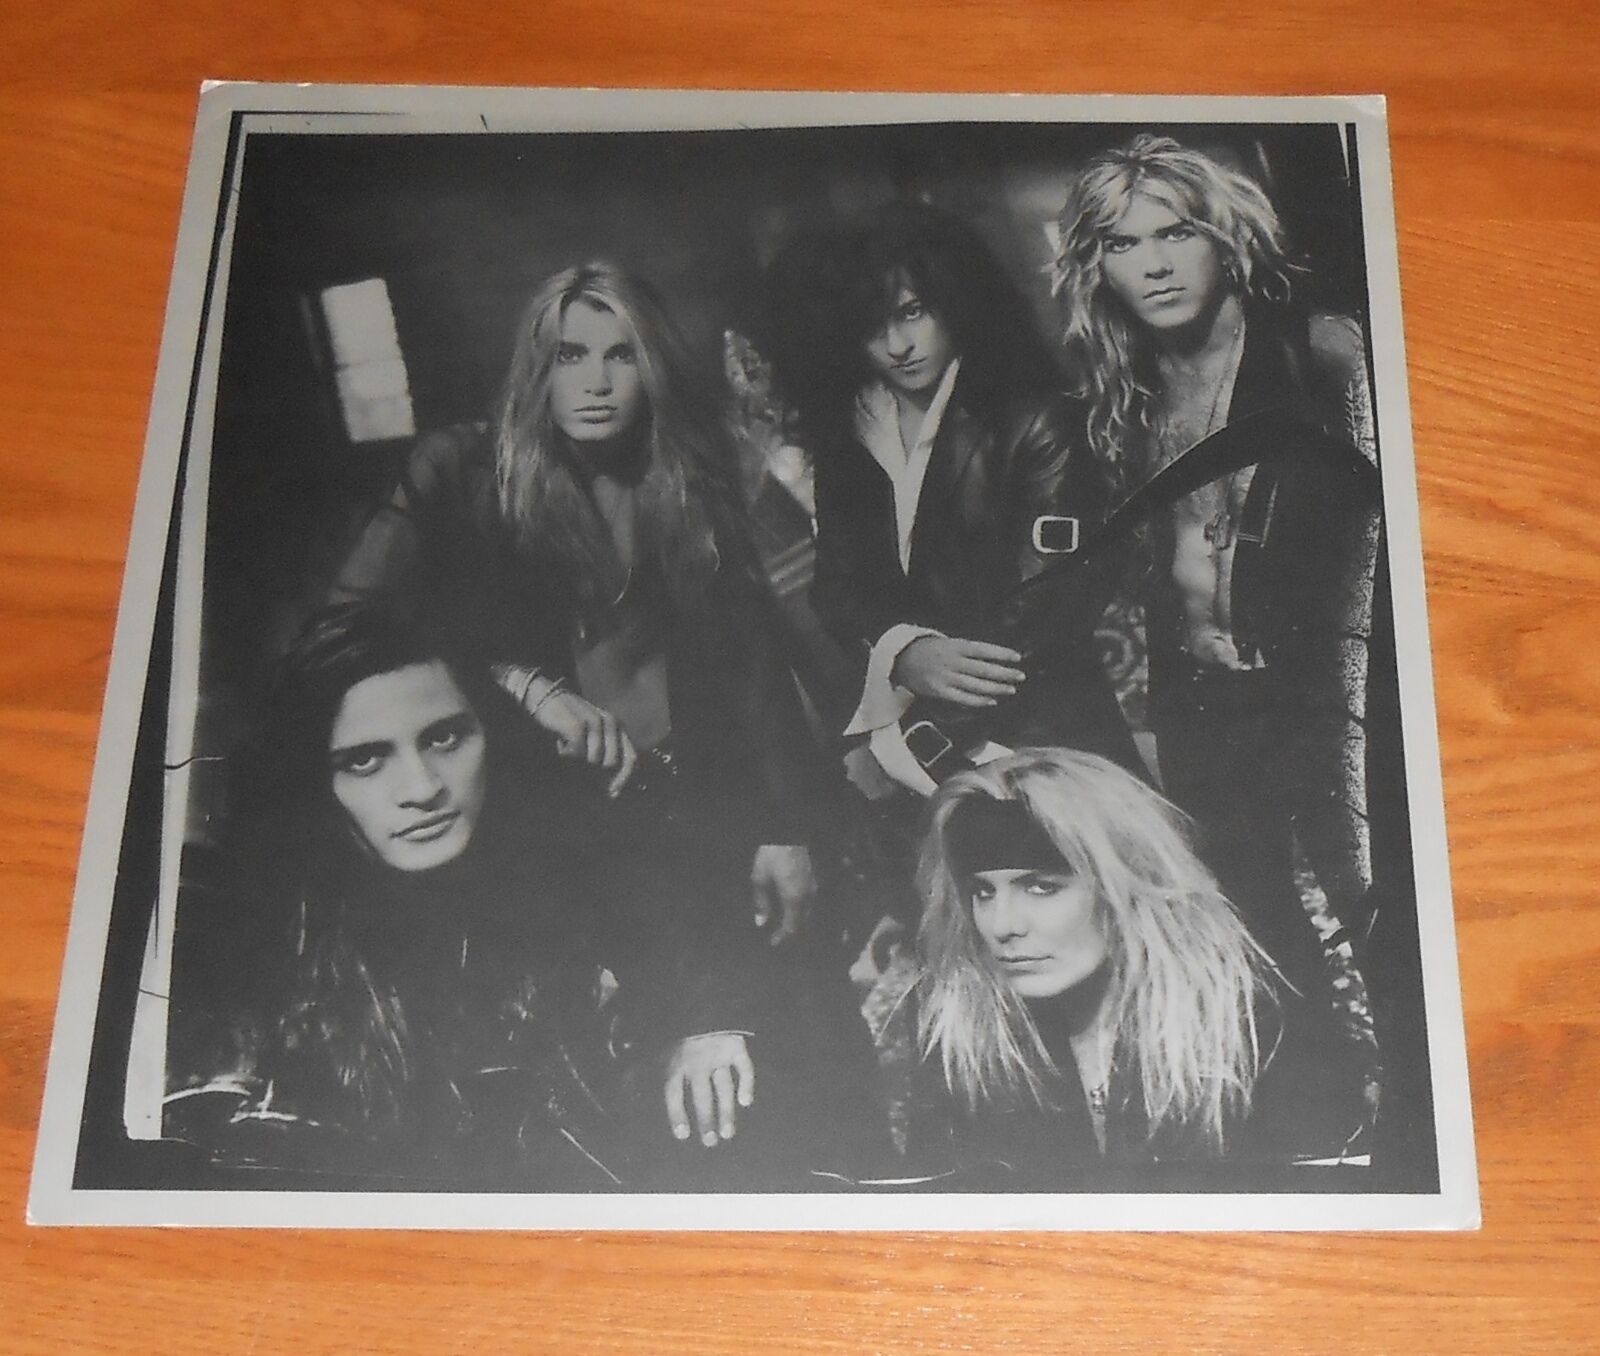 Motley Crue Poster 2-sided Flat Square 1993 Promo 12x12 Vince Neil (silver)